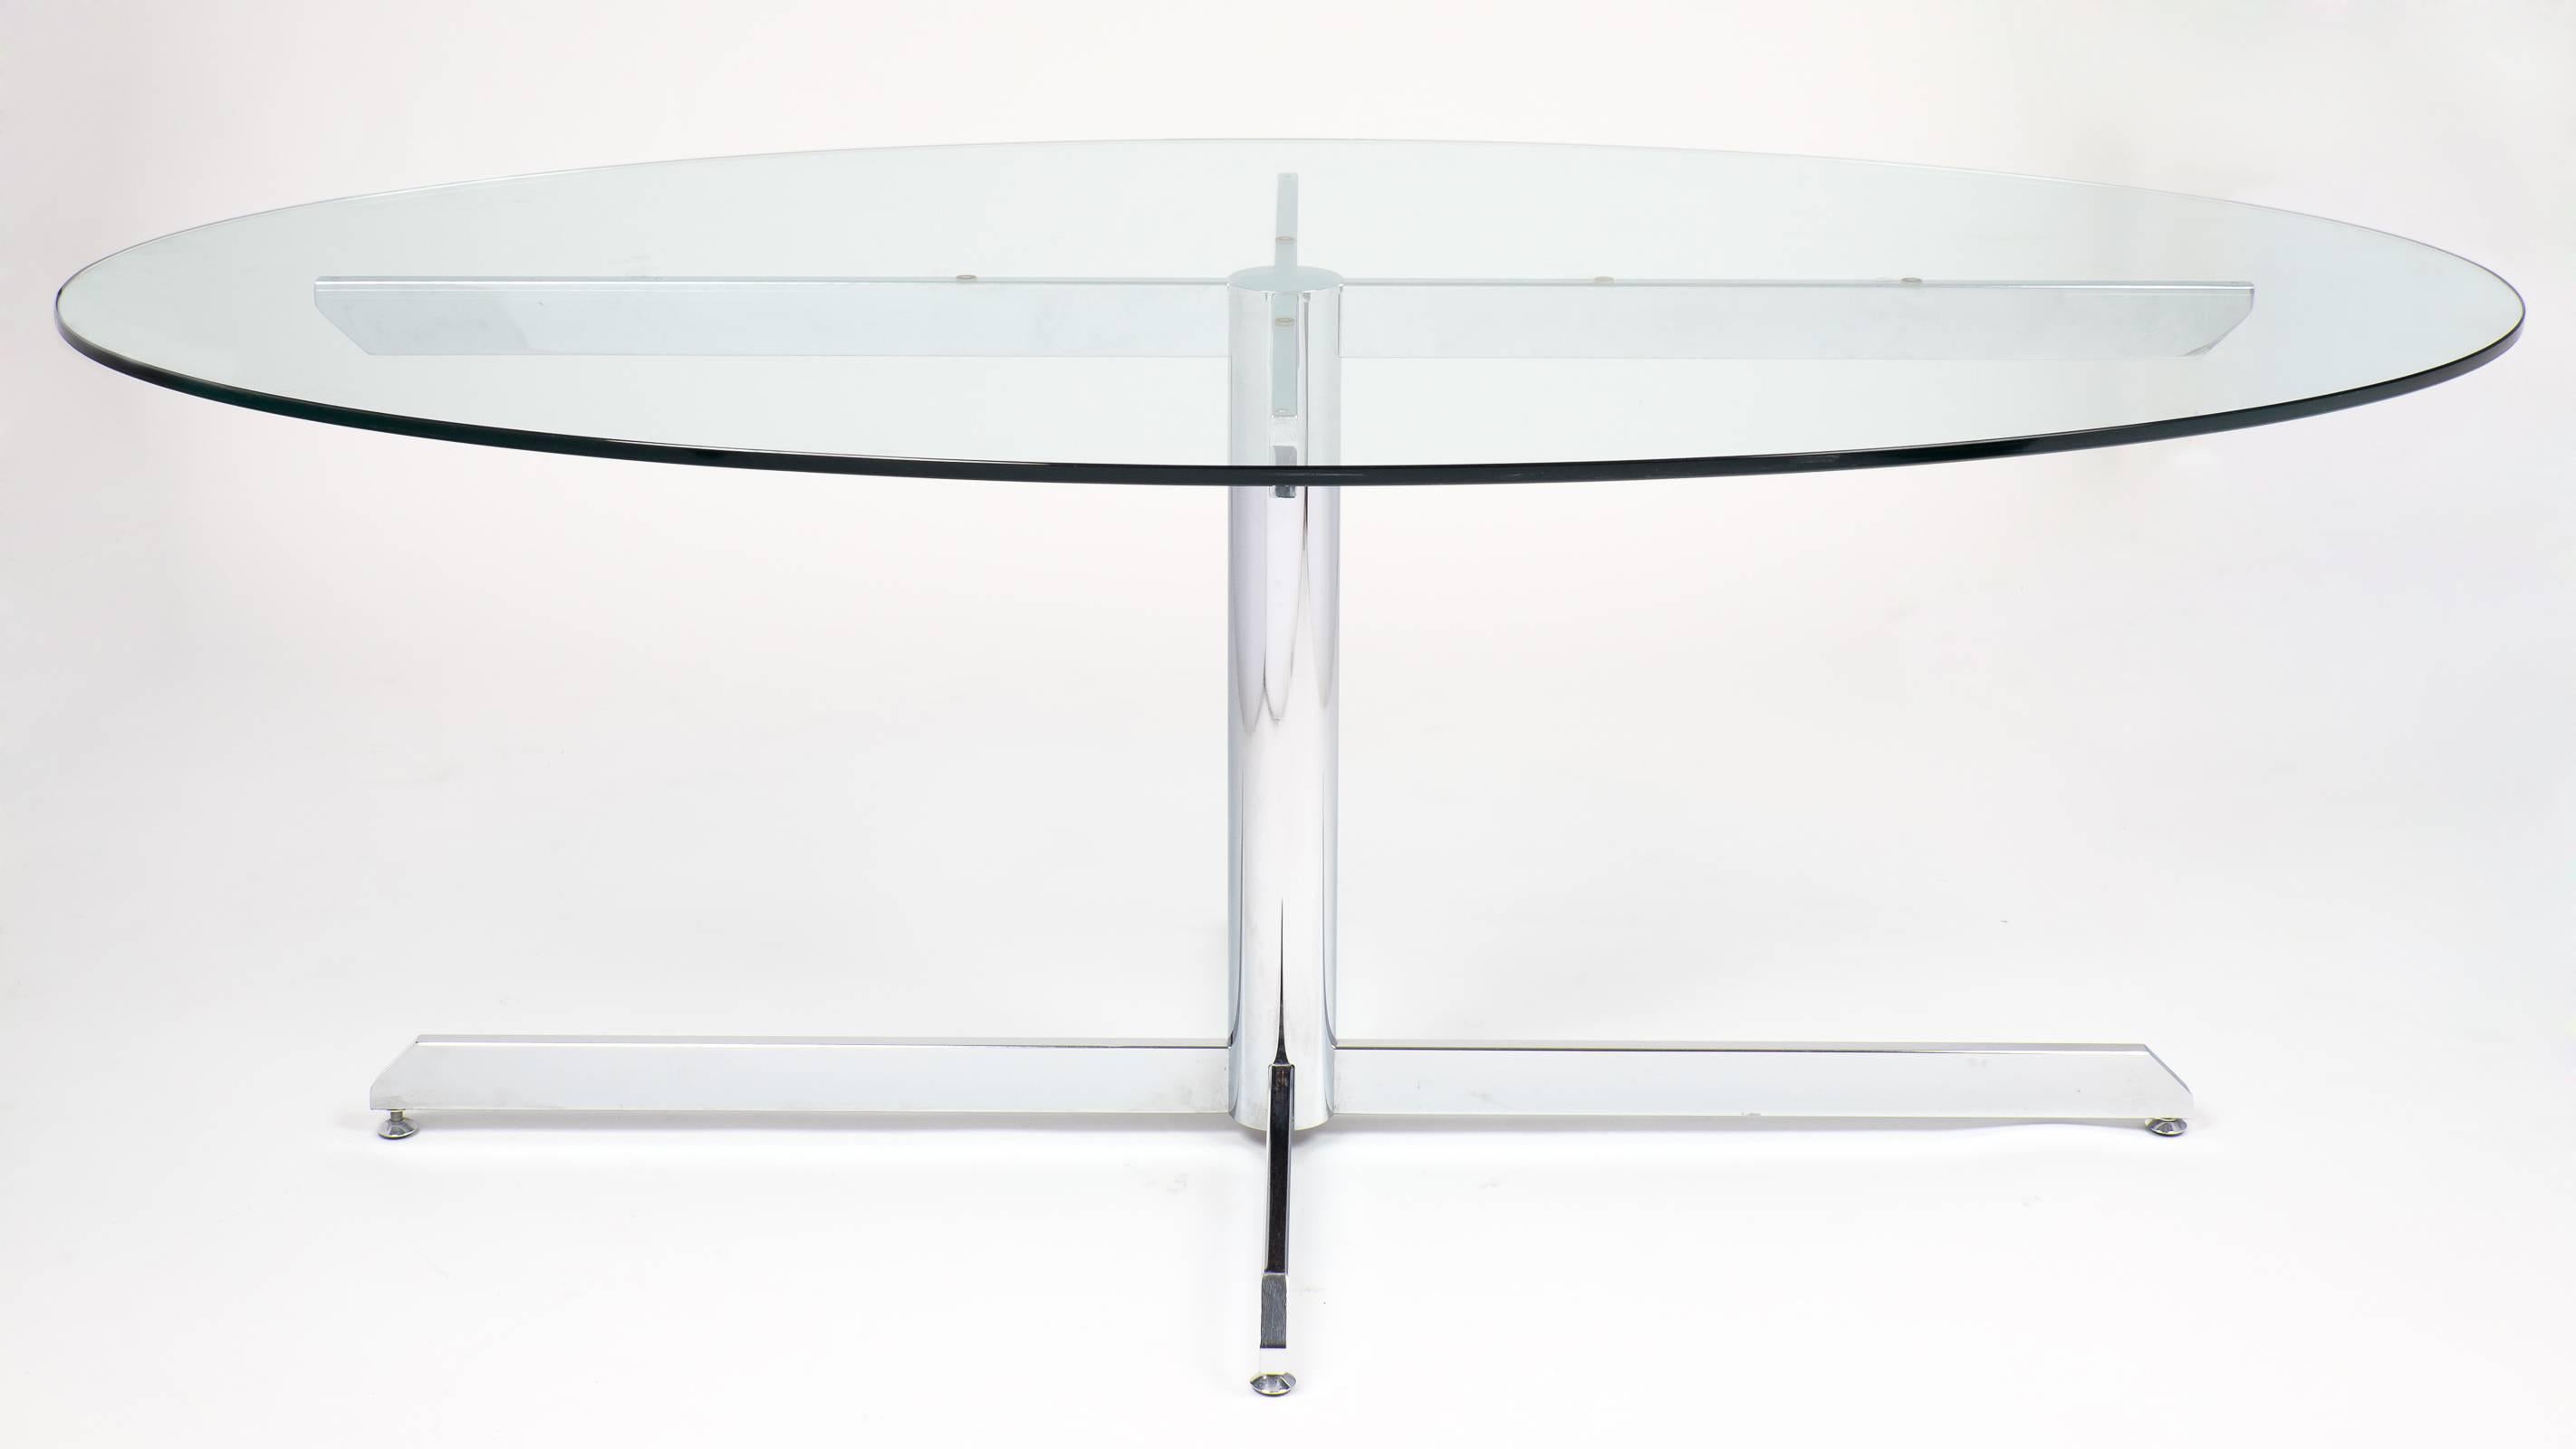 A sleek, crisp French modernist oval glass and chrome Knoll style dining table that is balanced perfectly by opposing geometric shapes. Equally great in an office setting or in the dining room. Options for seating is literally wide open making it a